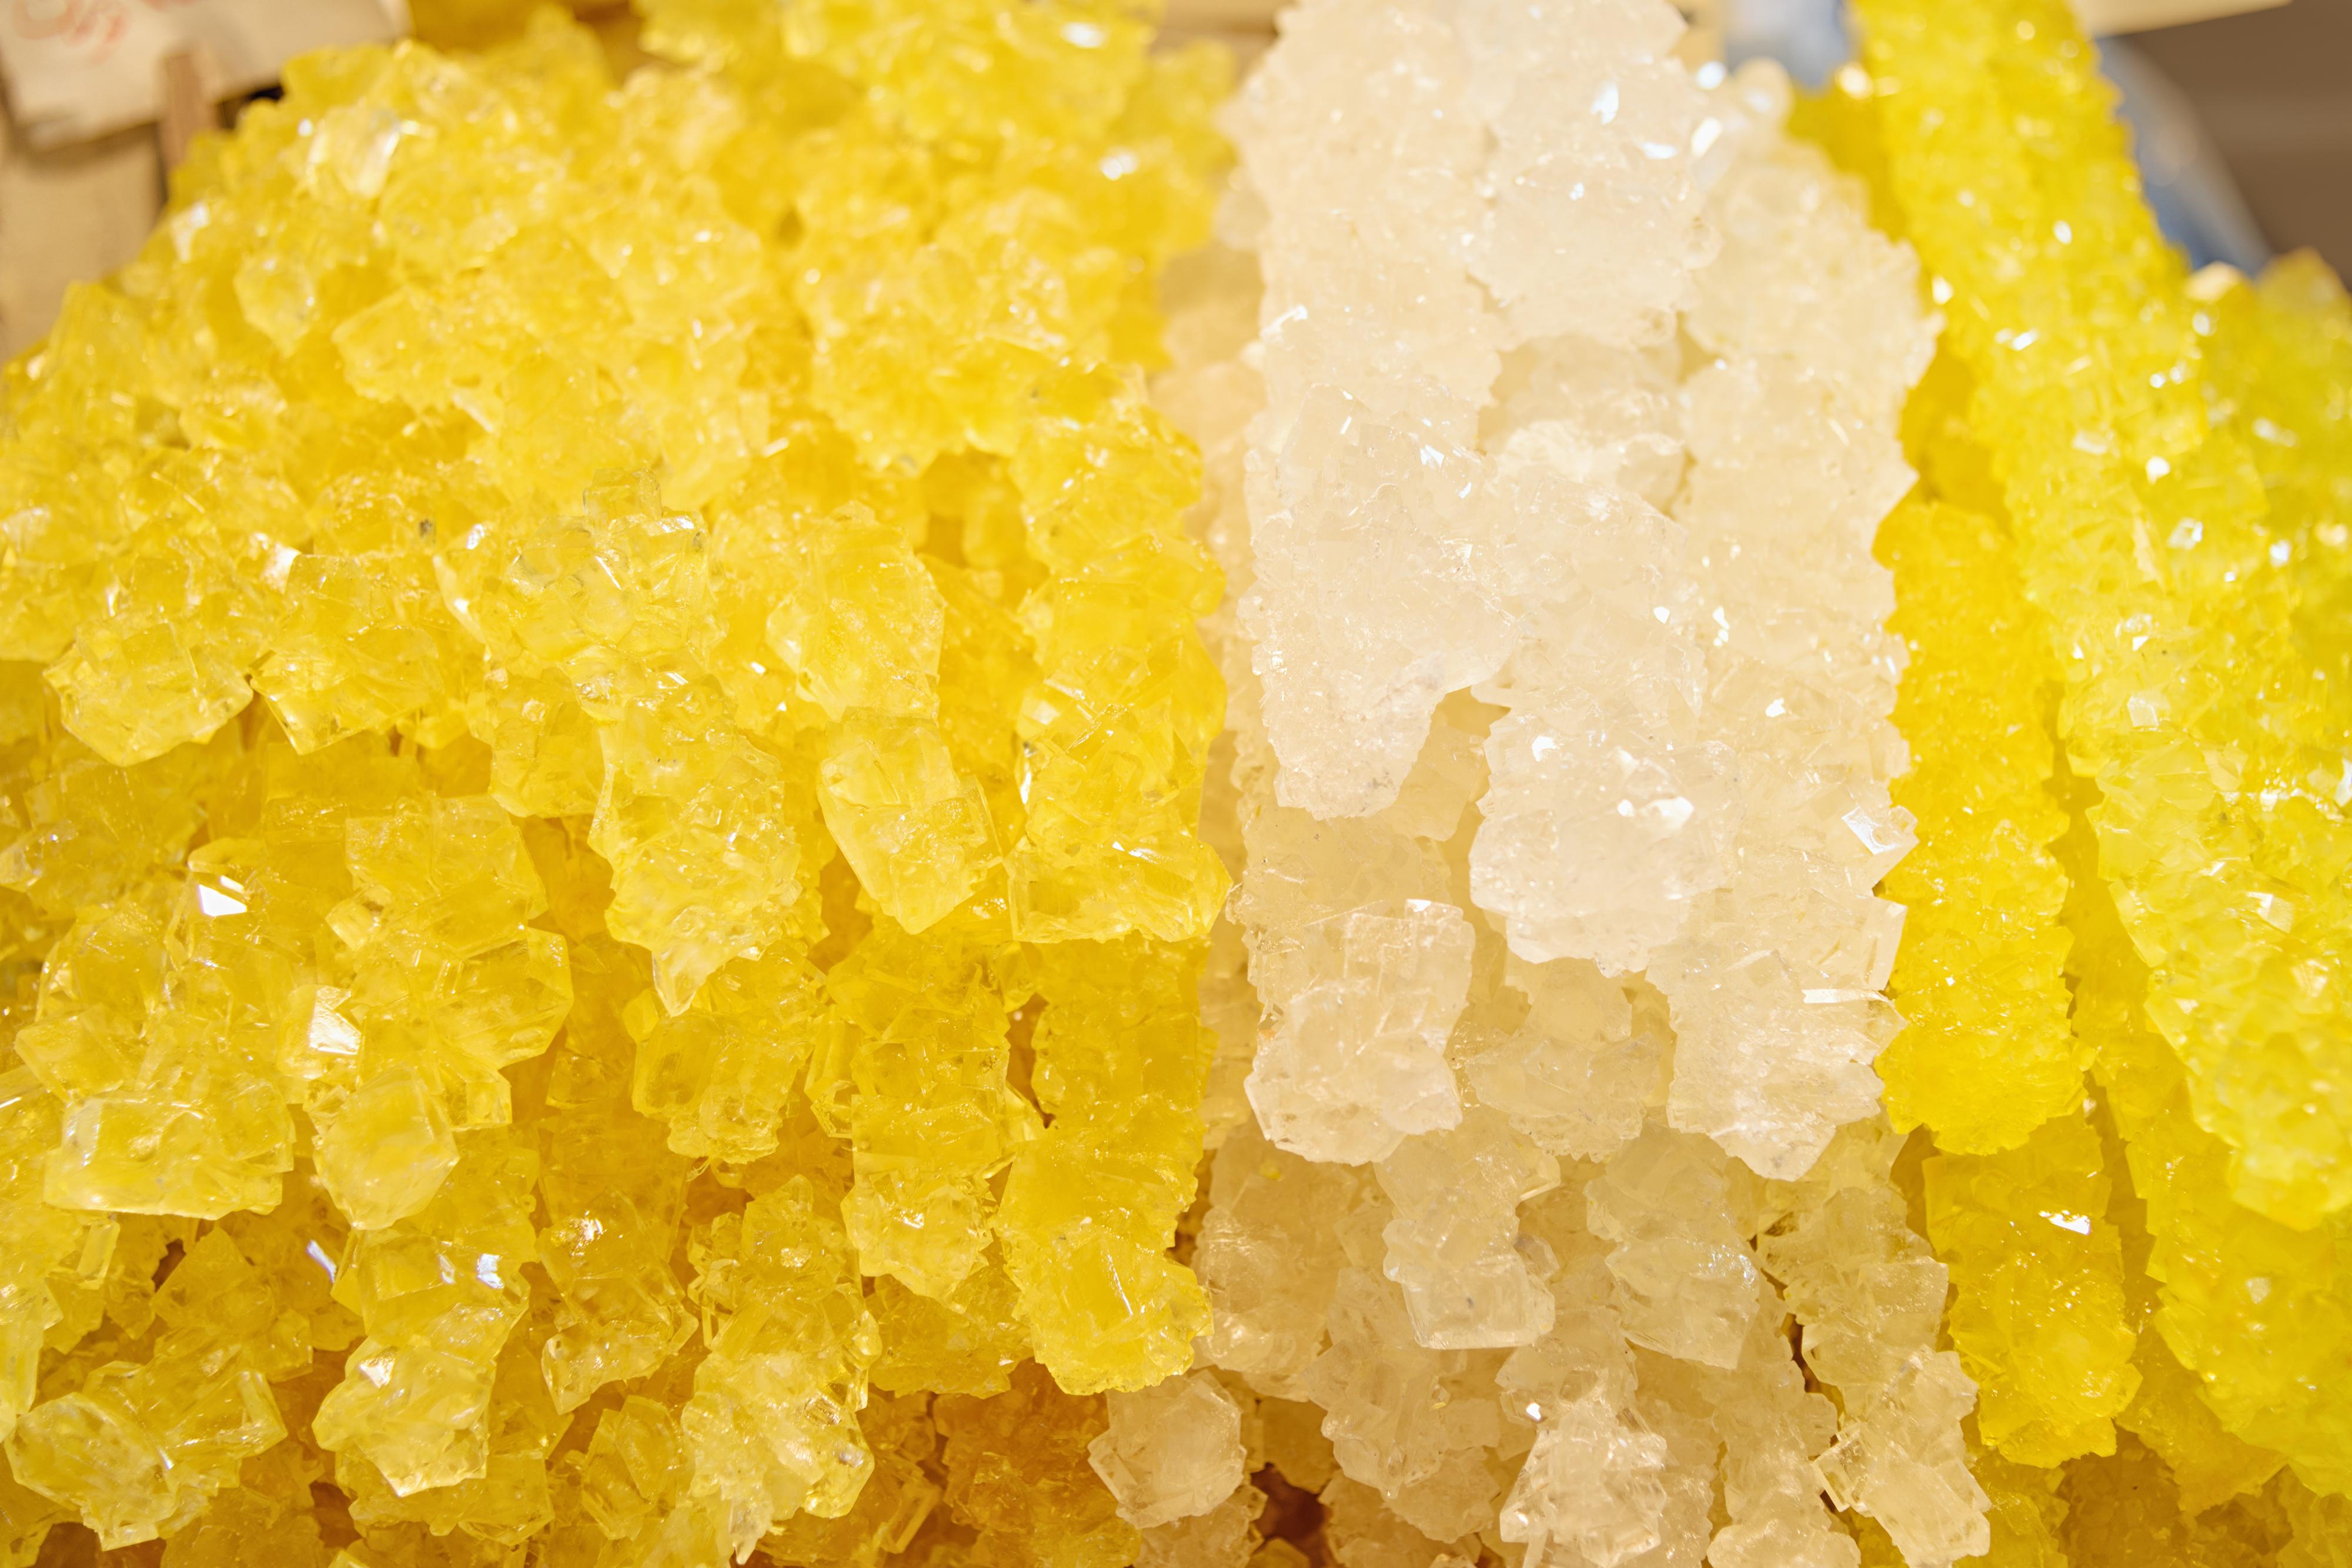 Nabat is Persian Saffron Rock Candy, crystallized sugar that is flavored with saffron